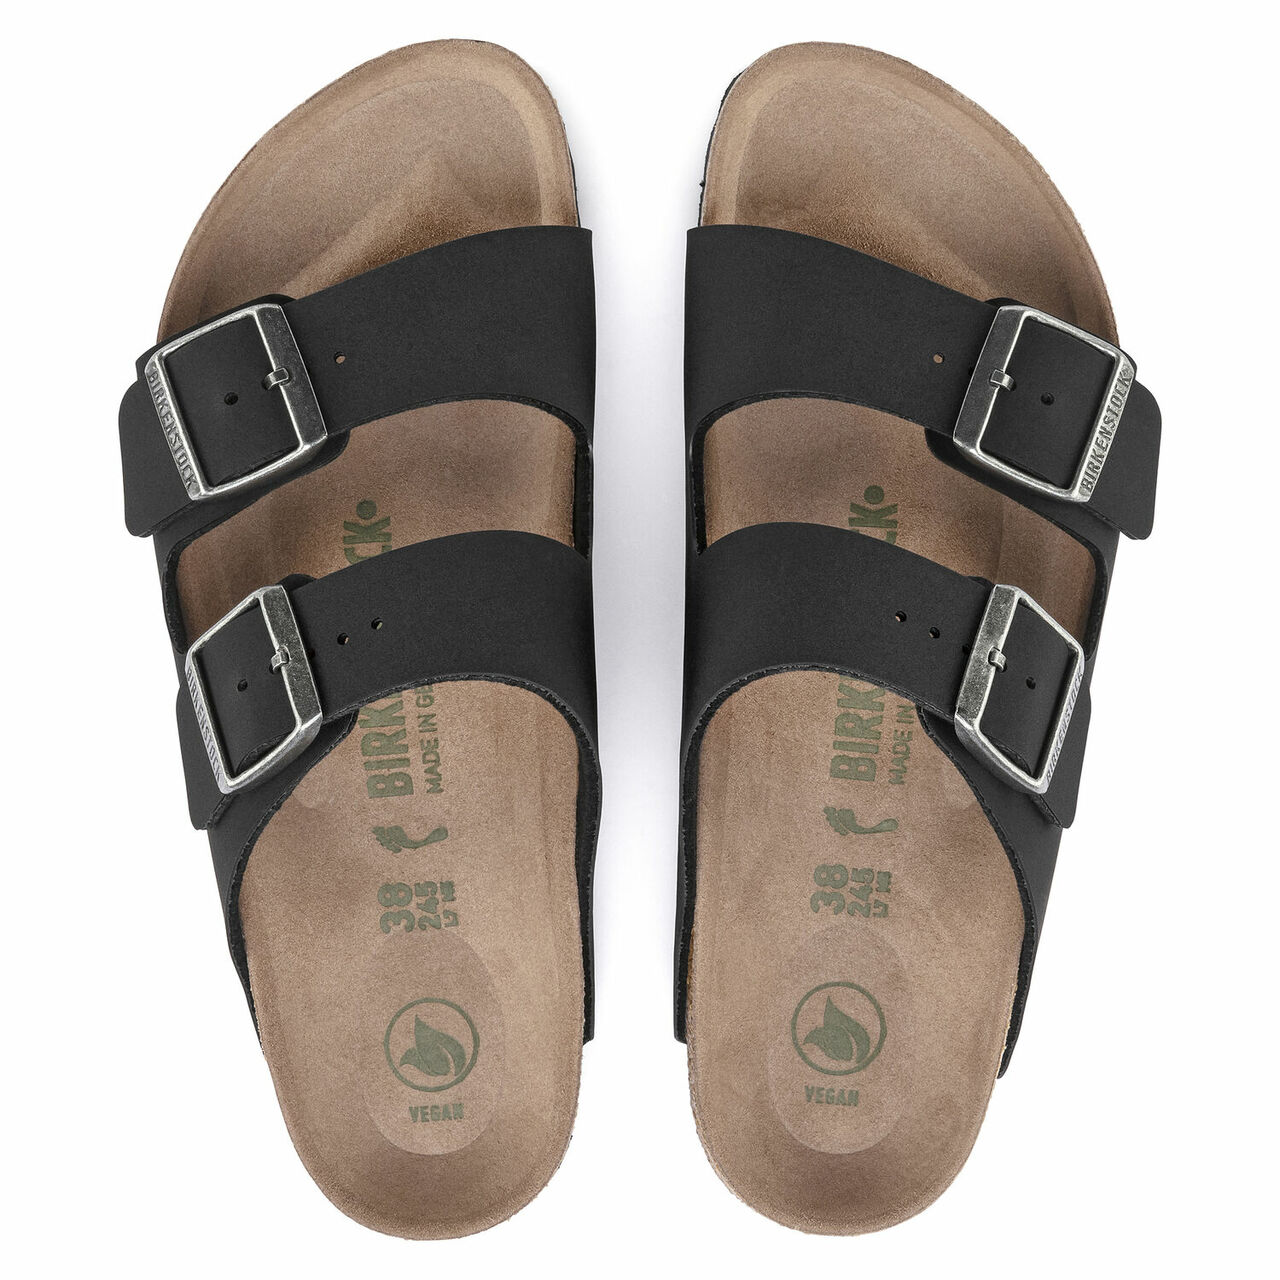 G NXT THONG FLIP FLOP AND SLIPPER FOR MEN COLOR RUST